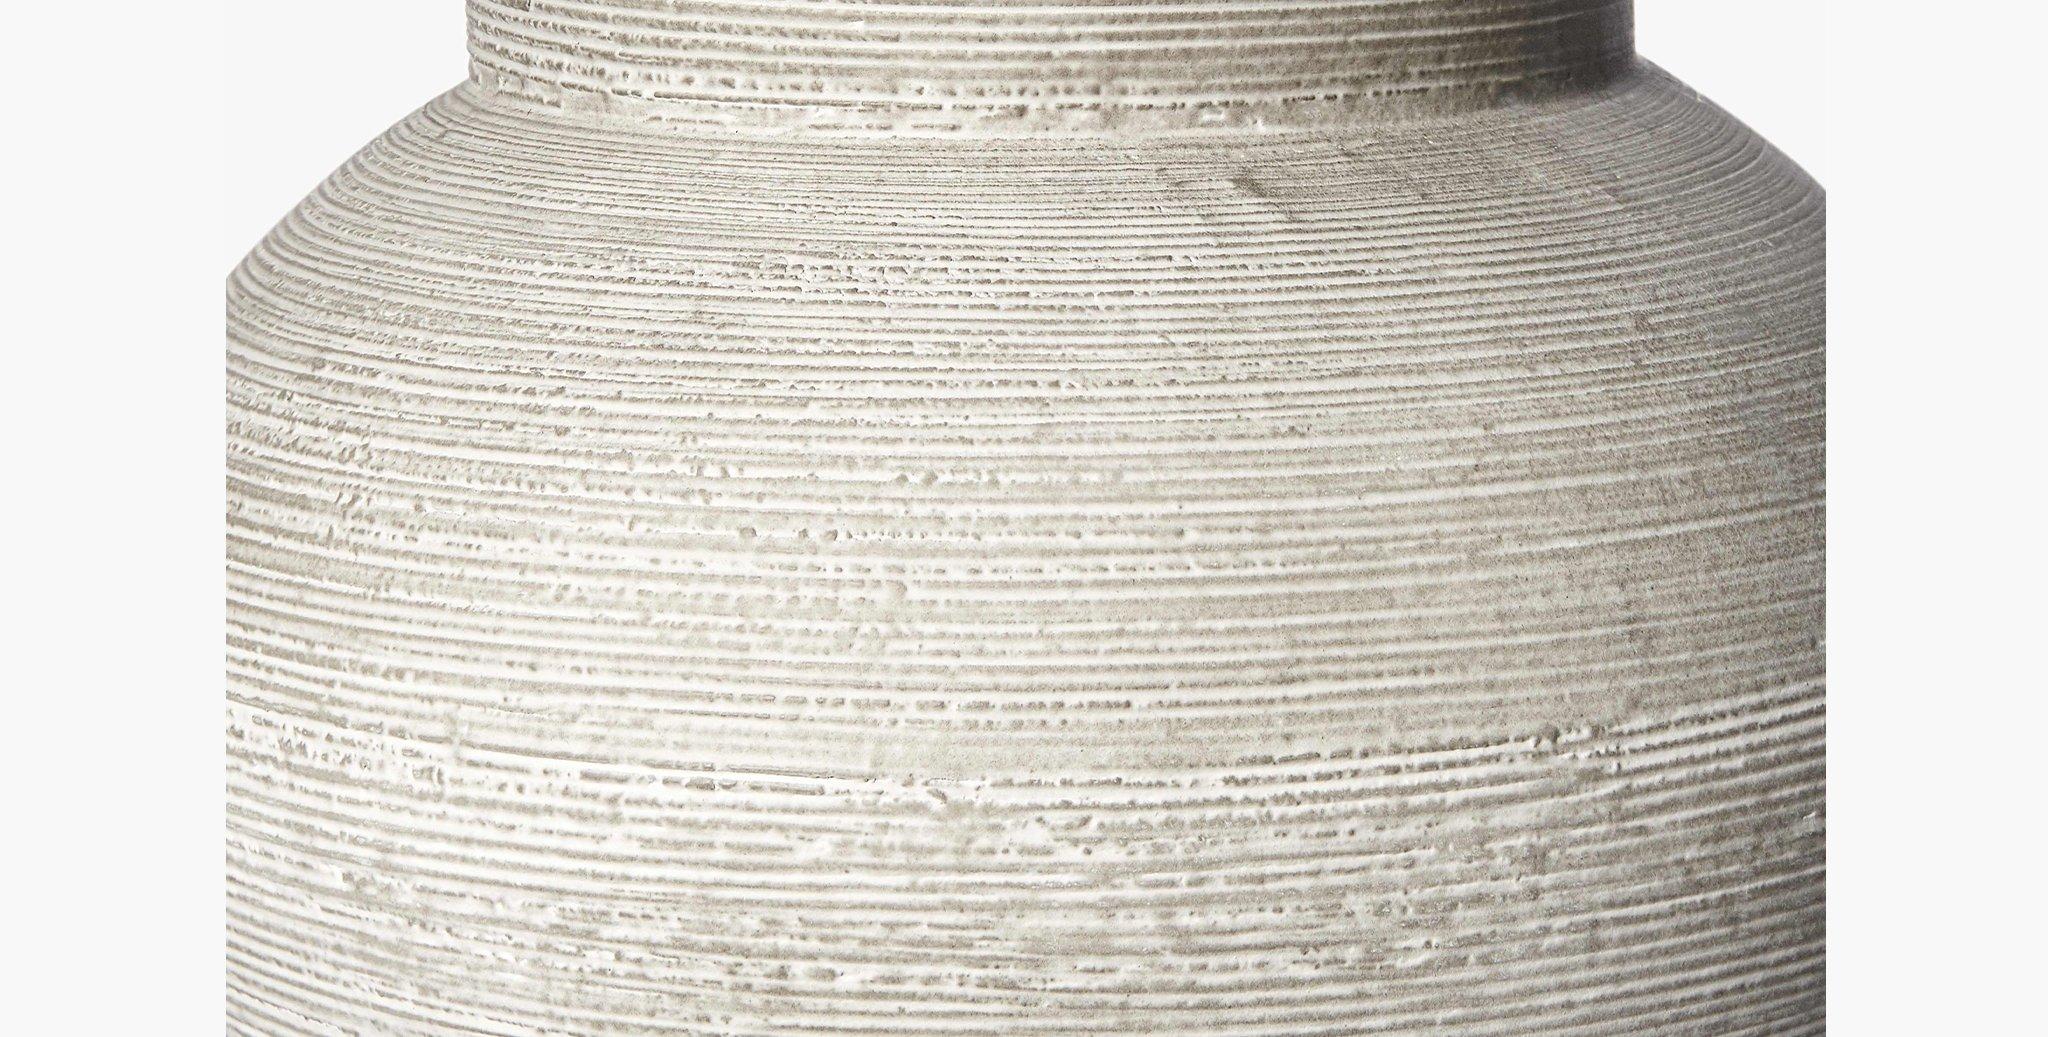 The hand-made Shaw Indoor / Outdoor Vase features an abstract shape and etched ribbed lines throughout, offering a rustic point of interest.

Hand-molded and painted
Made of clay and stone powder
Imported
Vessels must be kept under a covered